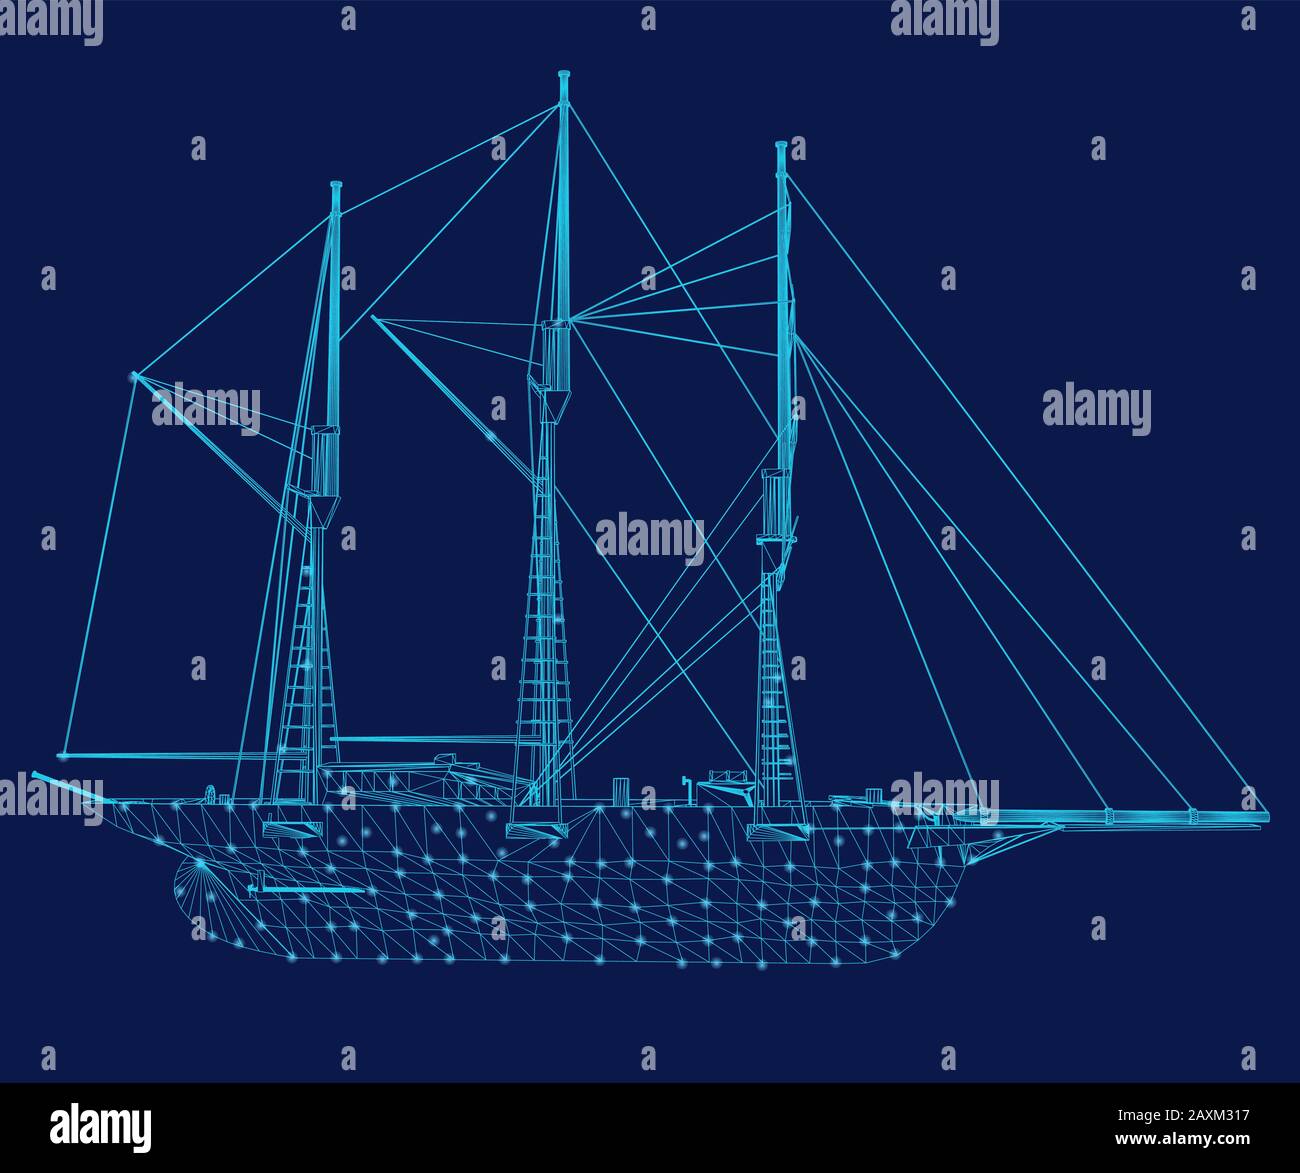 Wireframe of a sailing ship of blue lines on a dark background. Side view. Vector illustration. Stock Vector